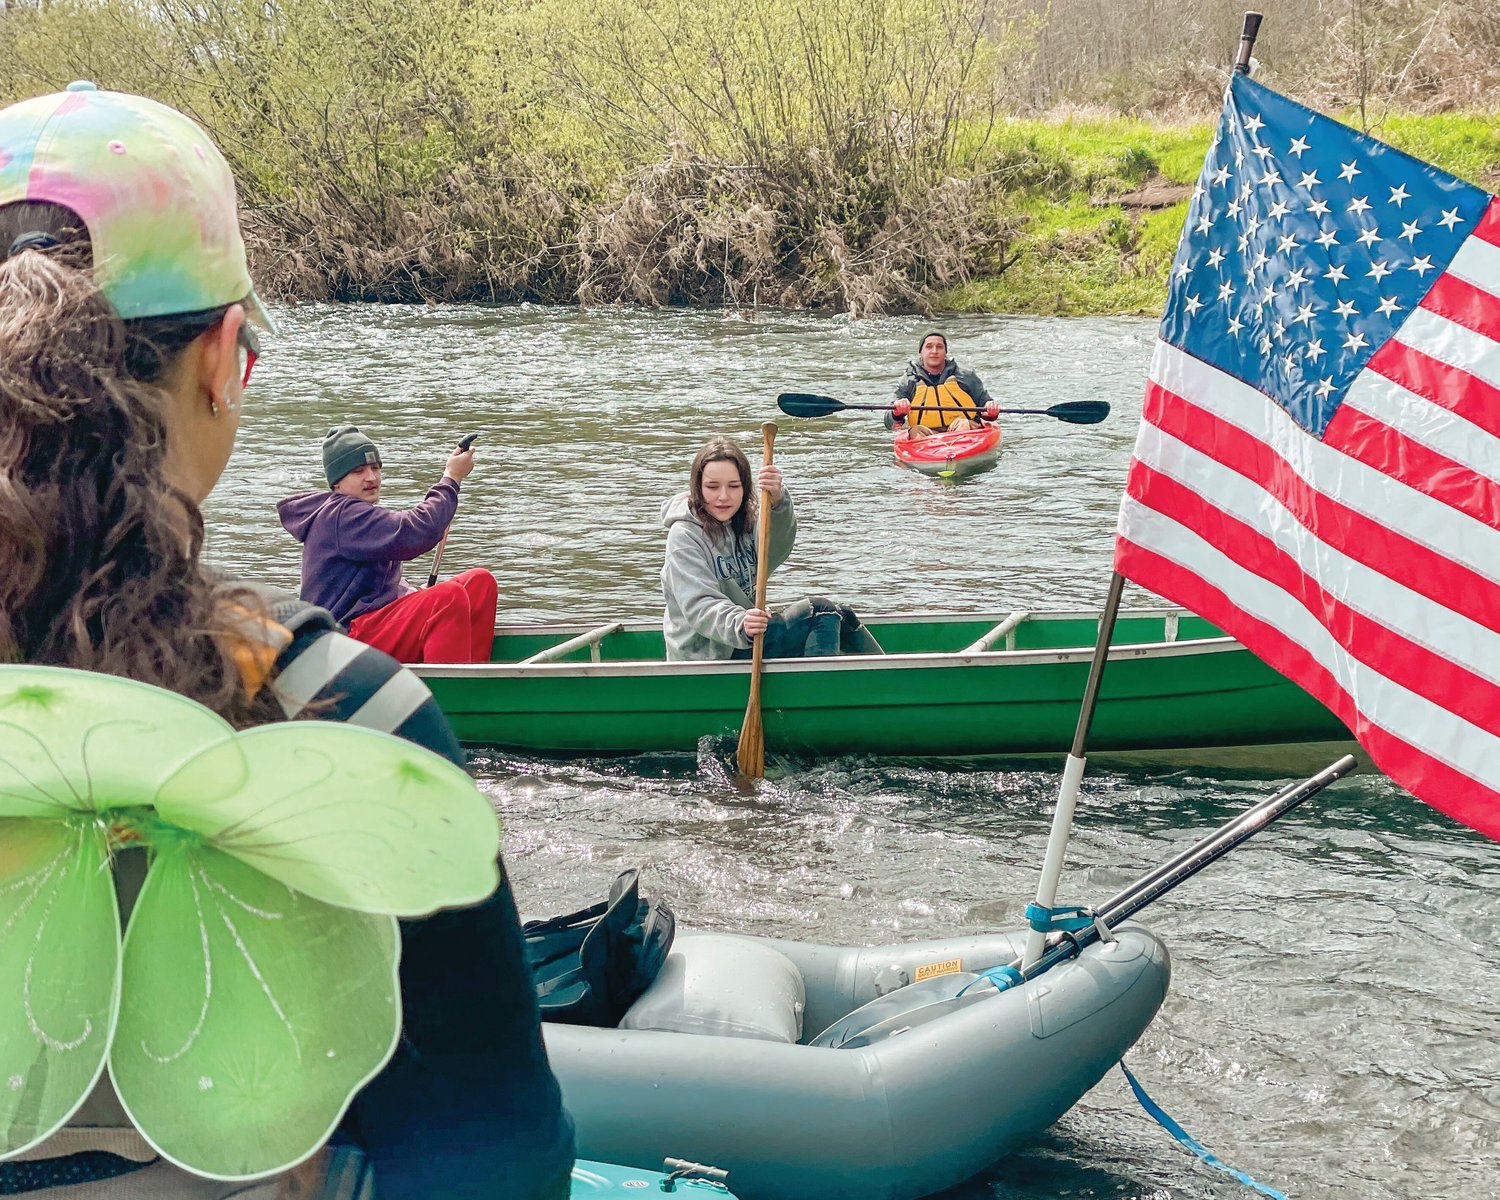 River runners sport hoodies, life vests, and fairy wings as flags wave from boats on shore of the Chehalis River on Saturday.